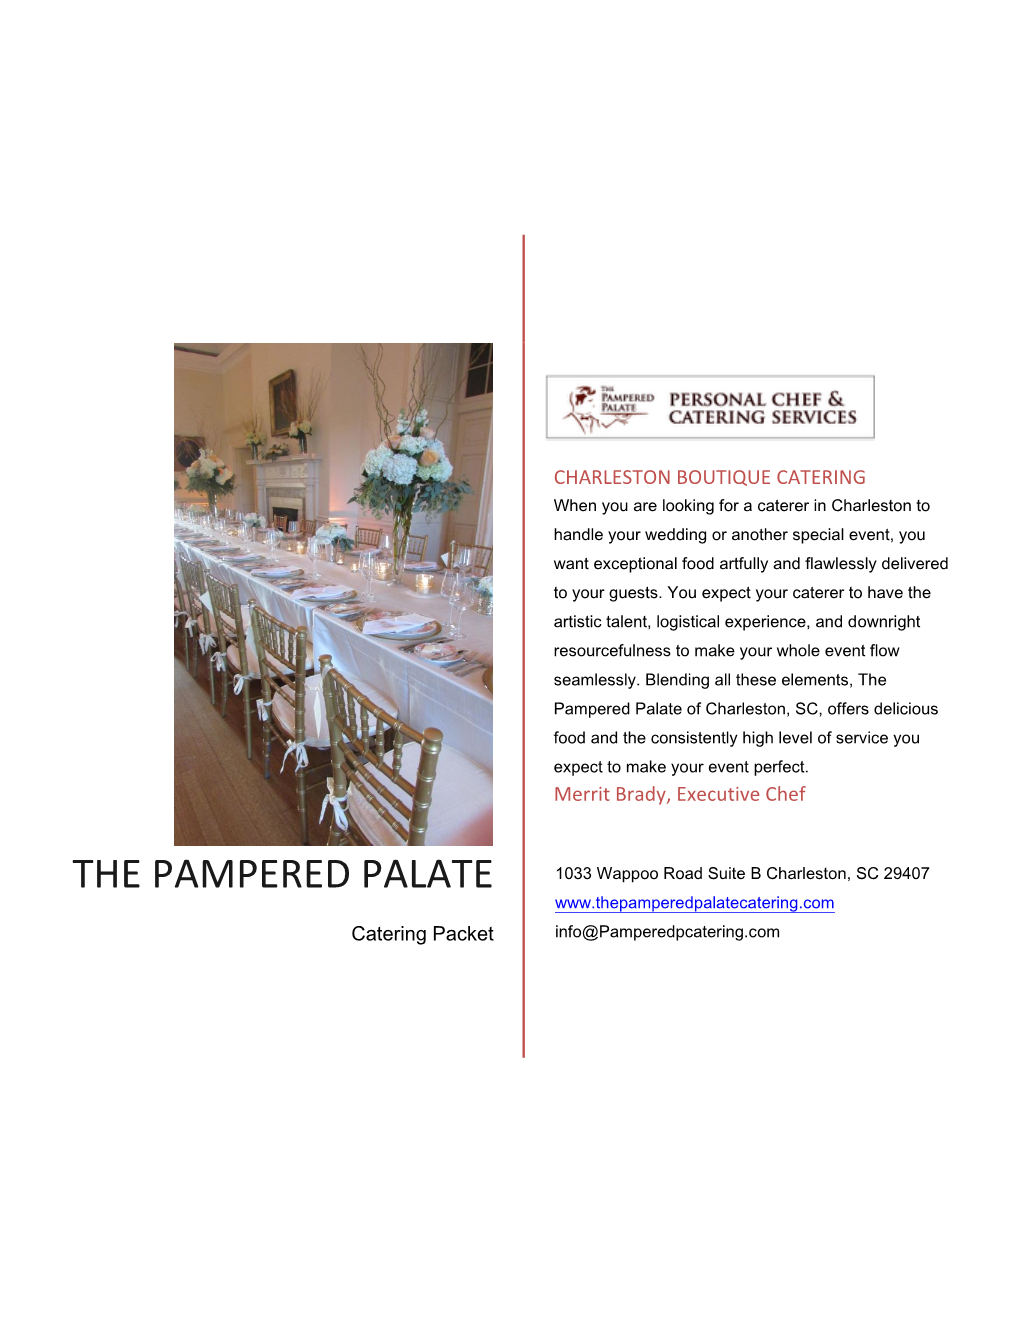 The Pampered Palate of Charleston, SC, Offers Delicious Food and the Consistently High Level of Service You Expect to Make Your Event Perfect